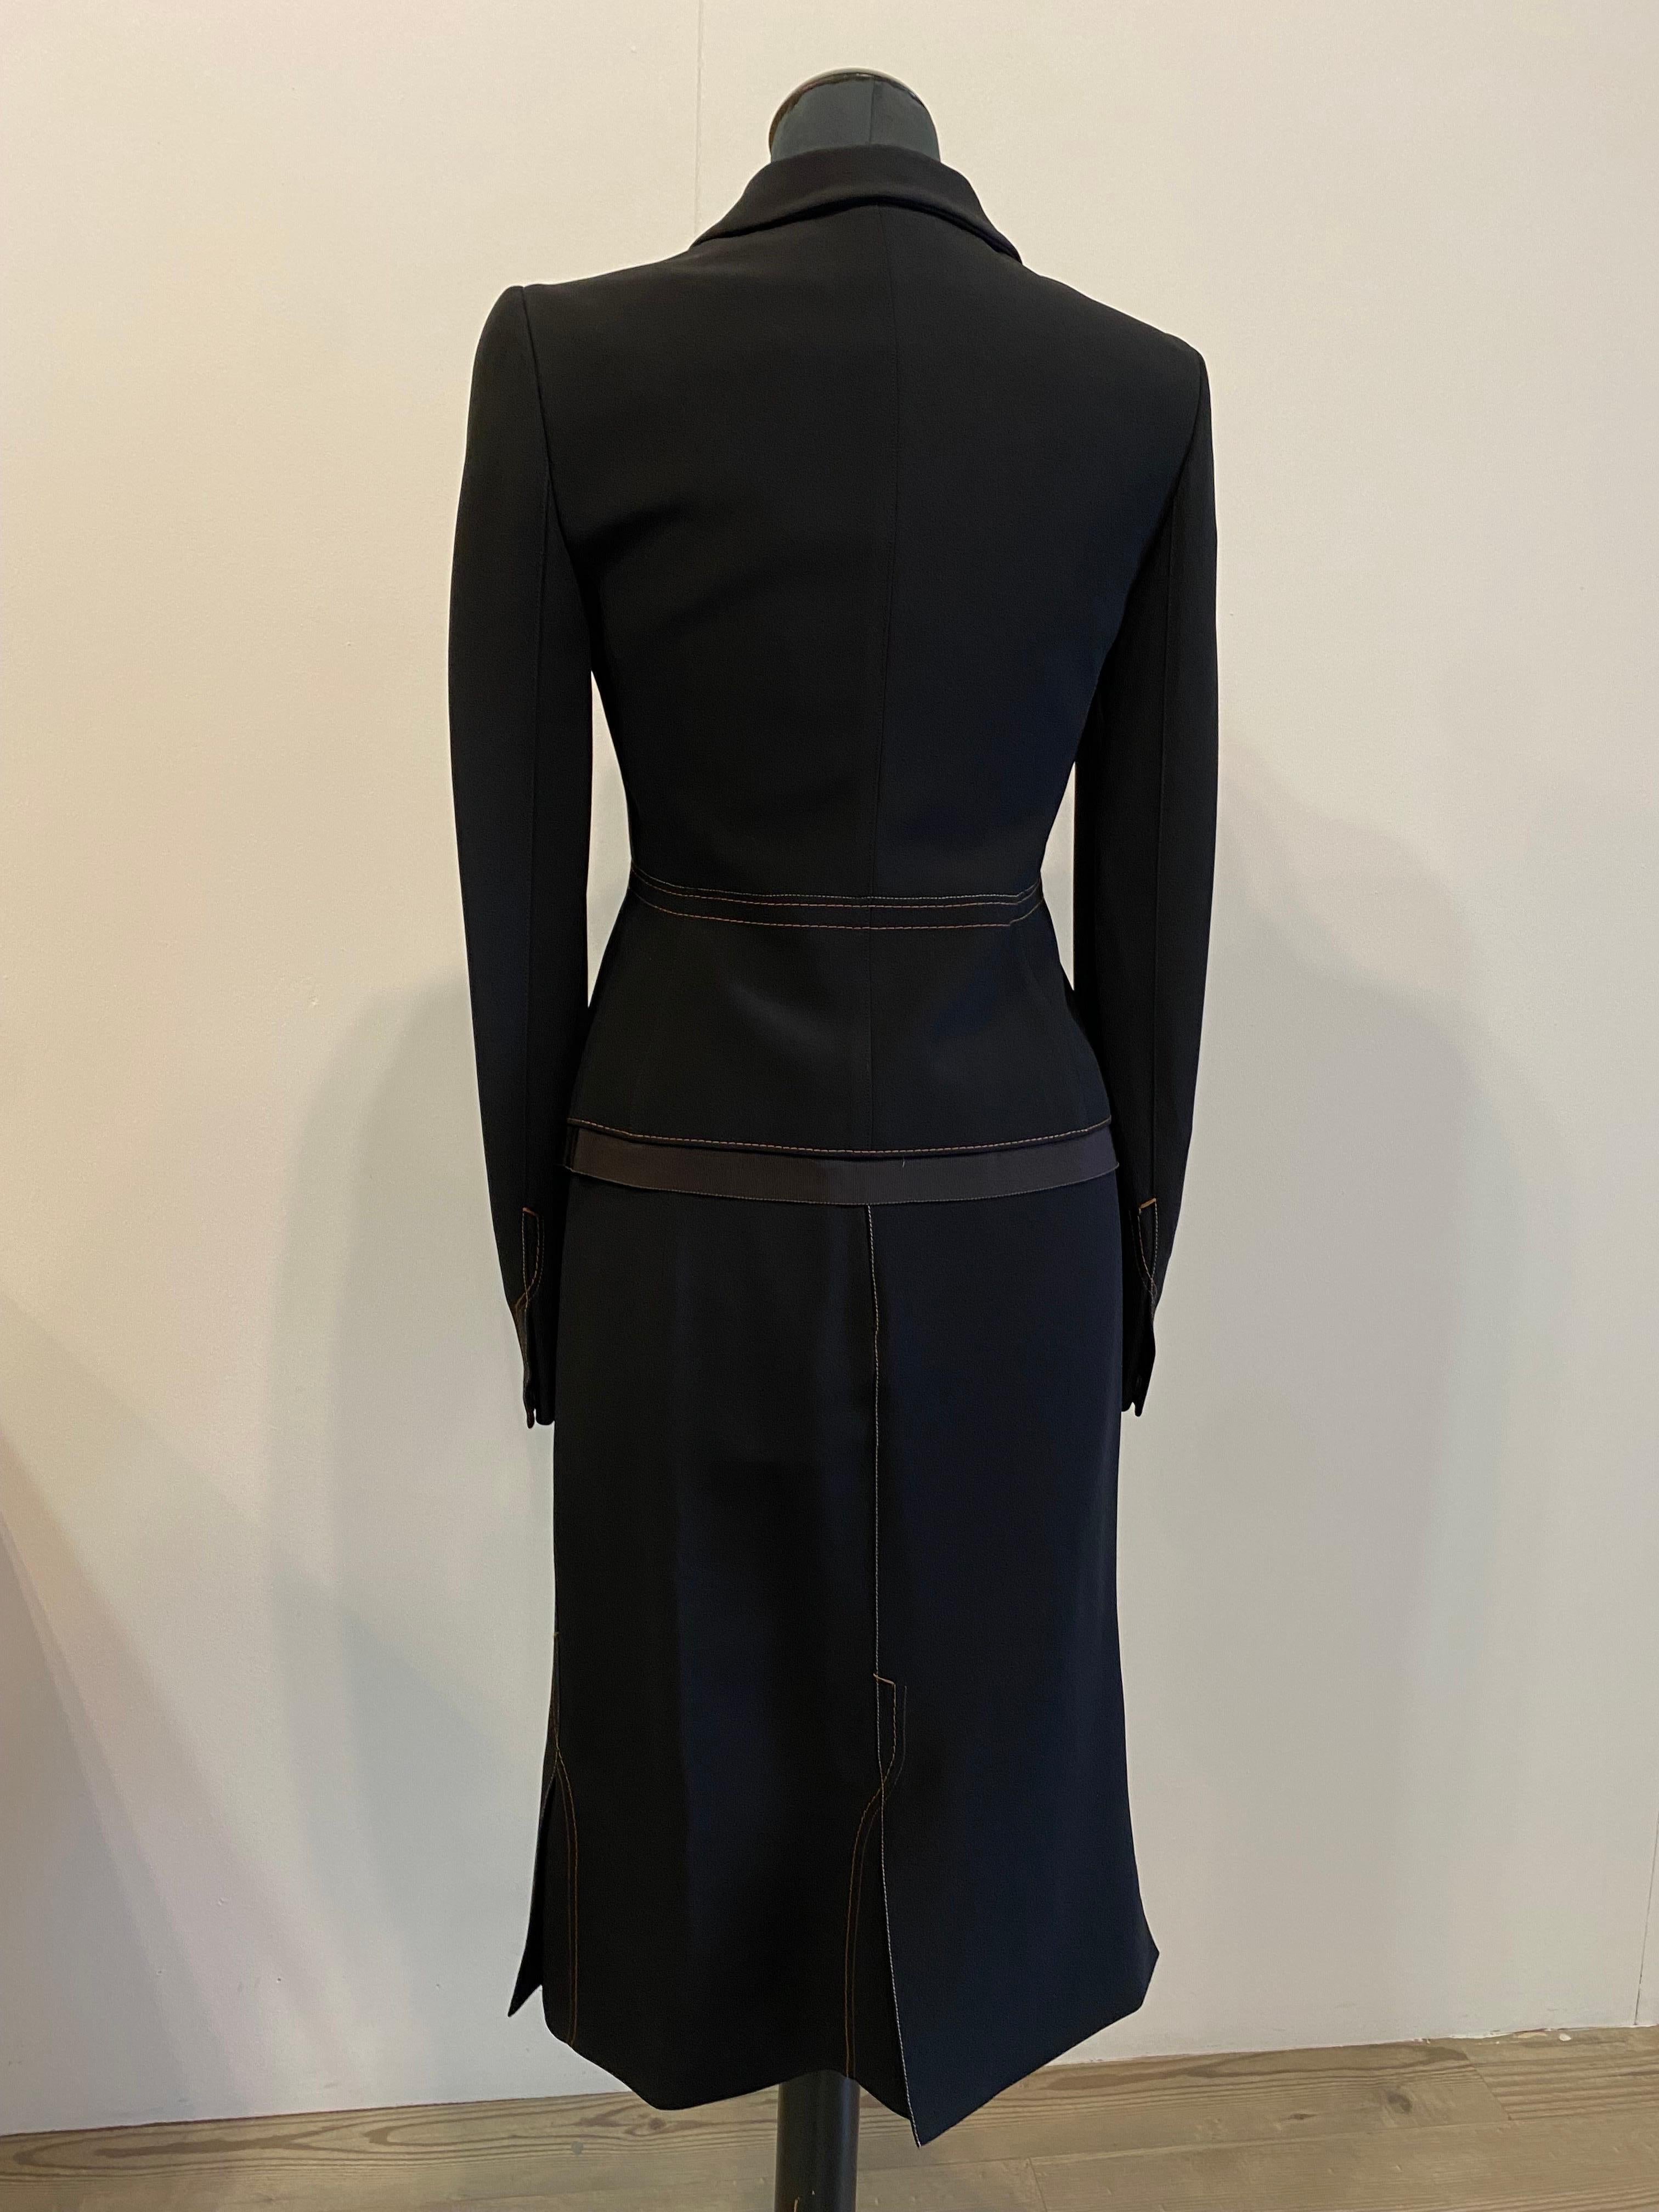 Prada black suit jacket and skirt
In acetate viscose and cotton.
Exposed brown toned stitching
Italian size 42.
The jacket has a hidden bootie closure, except the last one is visible.
Brown ribbed edge on the bottom.
measurement: shoulders 38
Breast